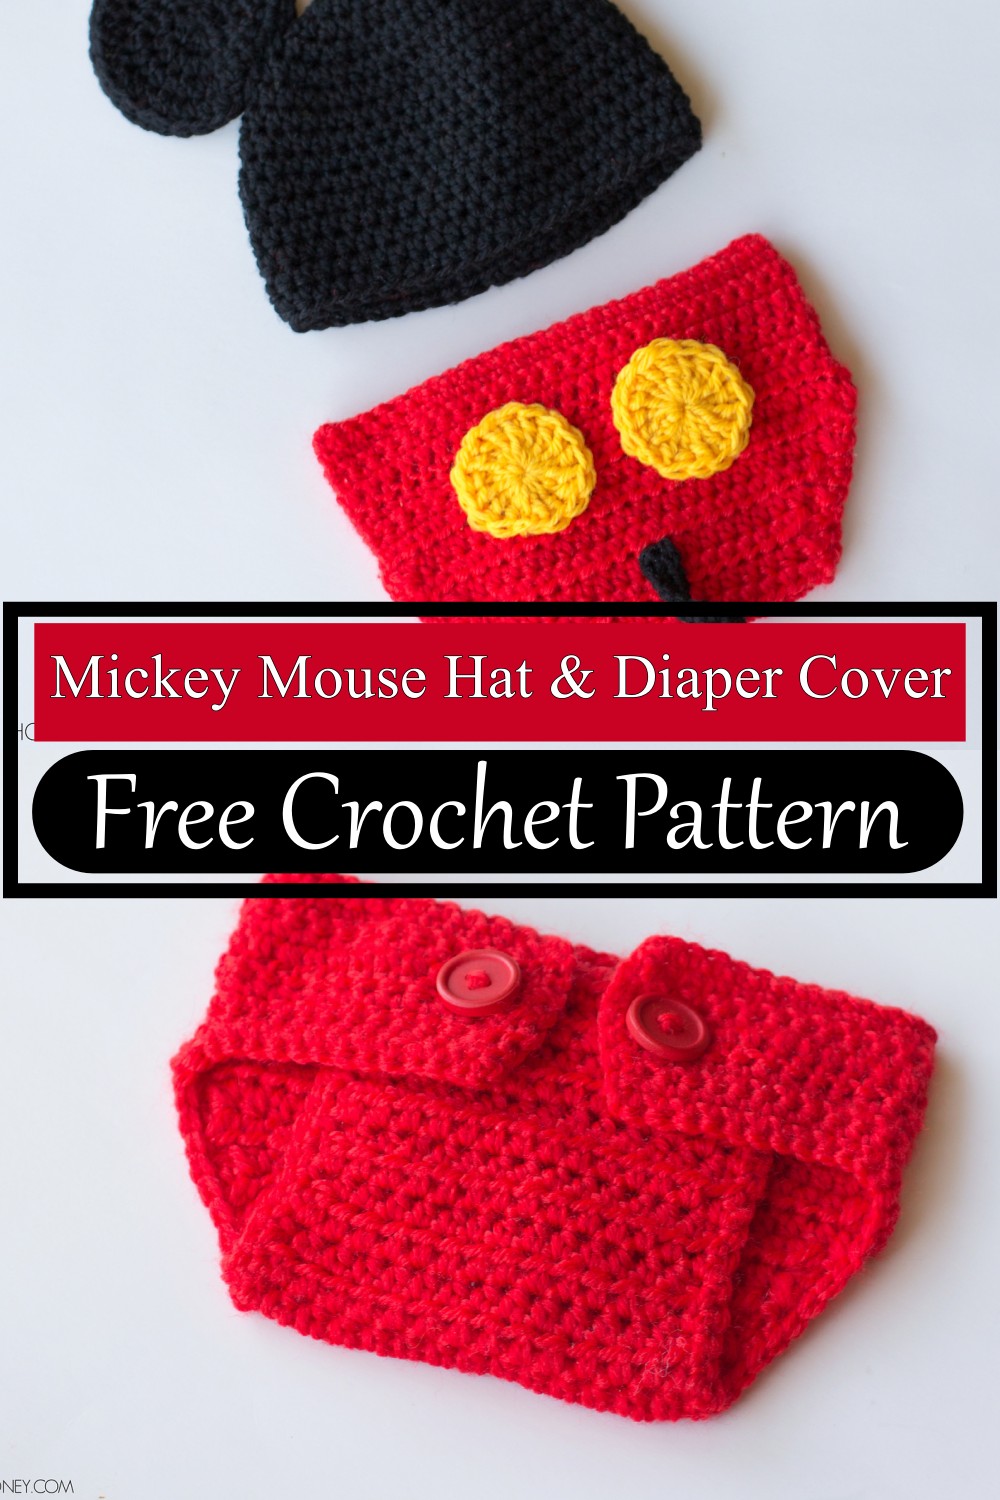 Mickey Mouse Hat & Diaper Cover